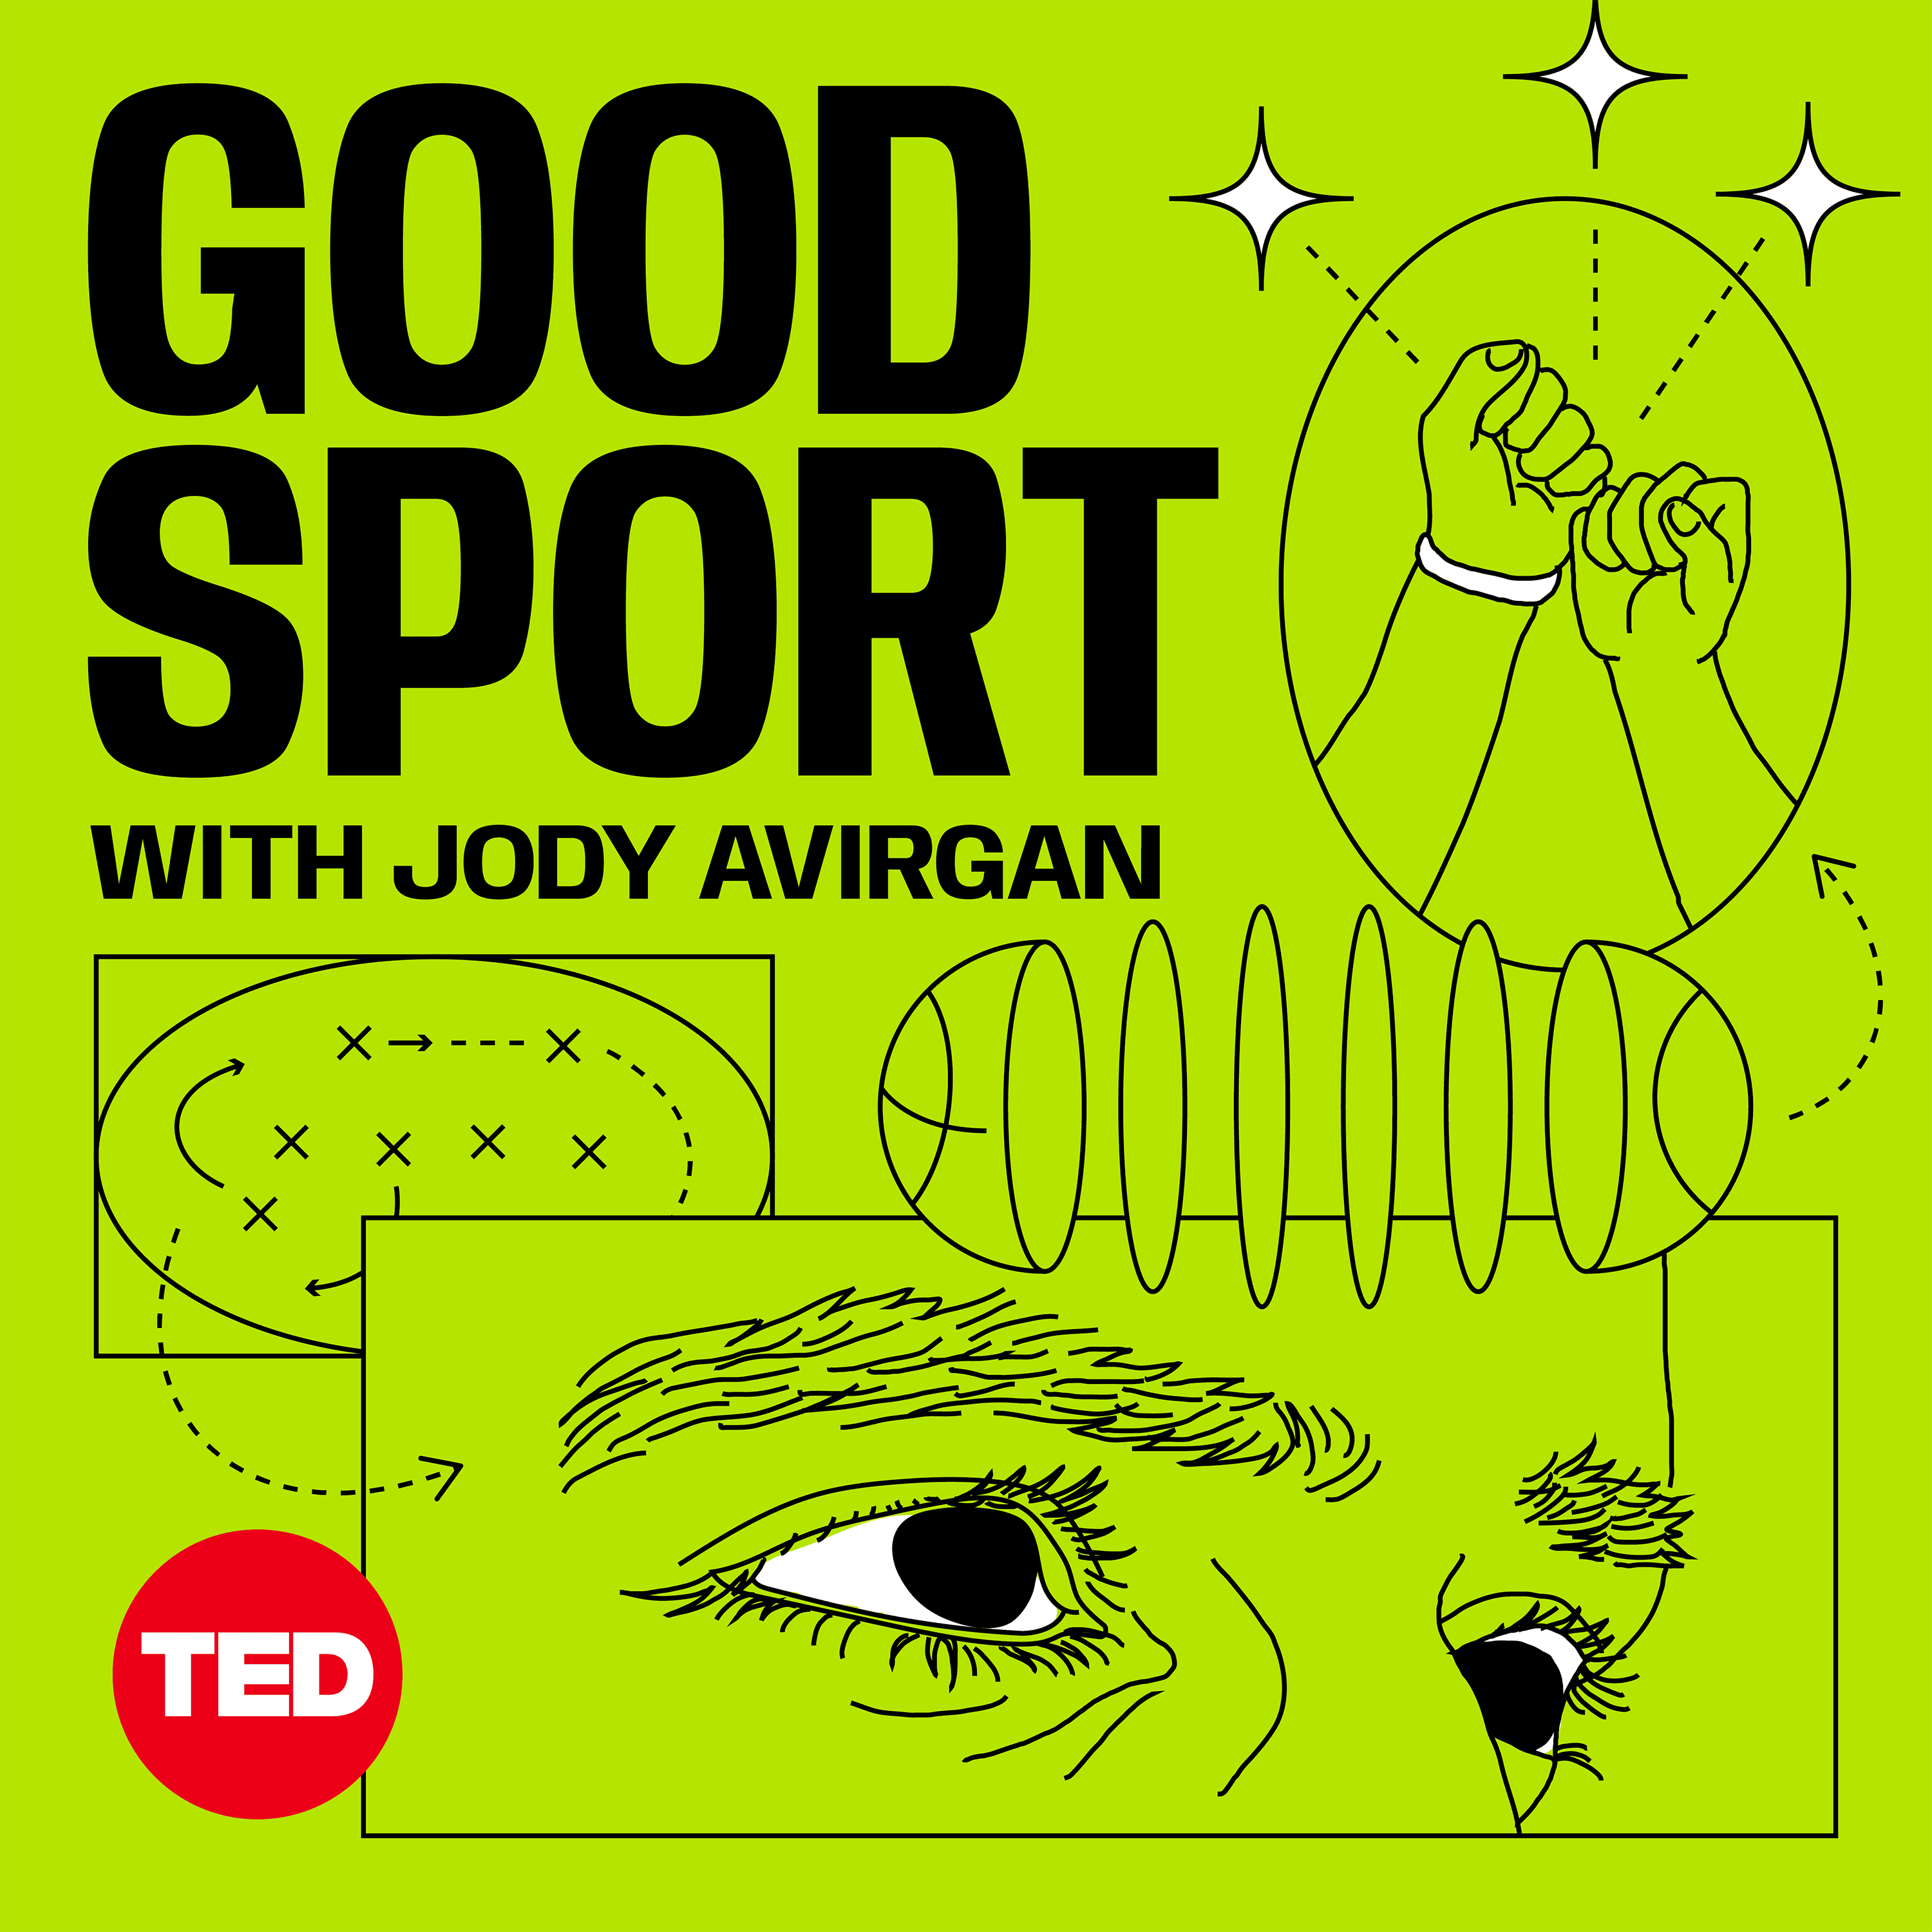 Thumbnail for "Introducing Good Sport".